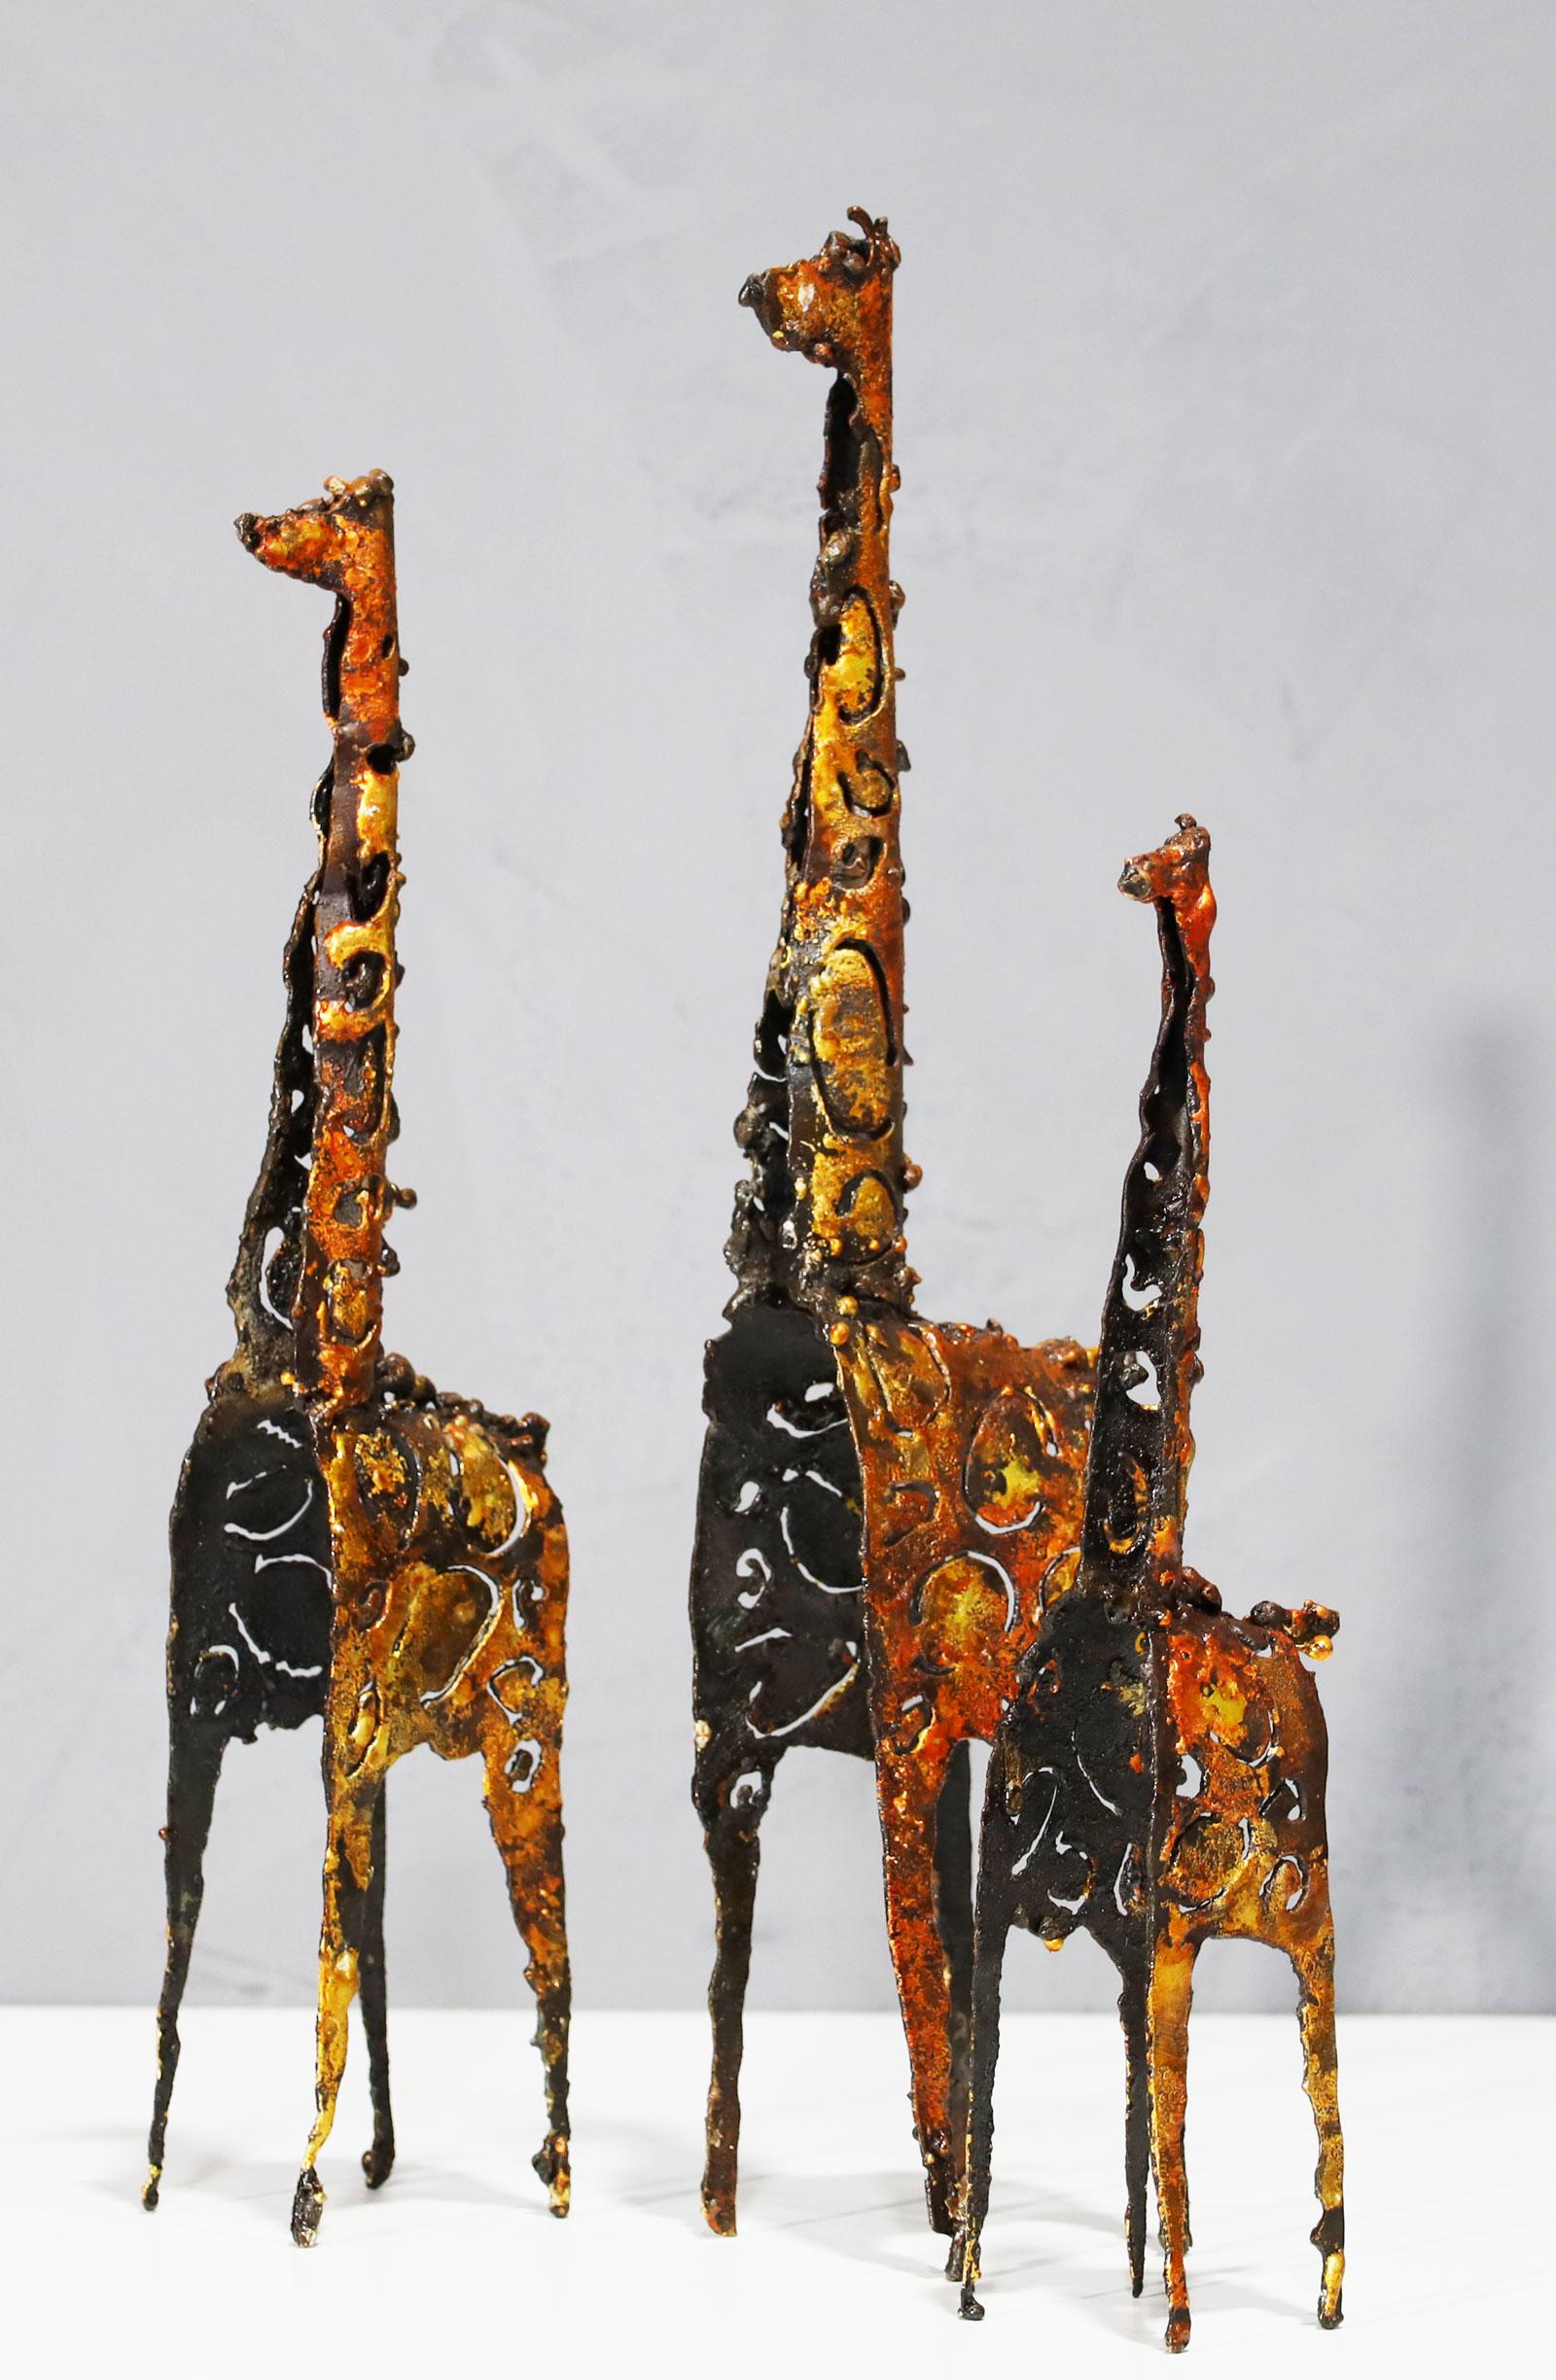 Brutalist style giraffe sculptures by James Bearden. Signed JB on the underside of one giraffe. Measurements of each as follows:

Measures: 17.75